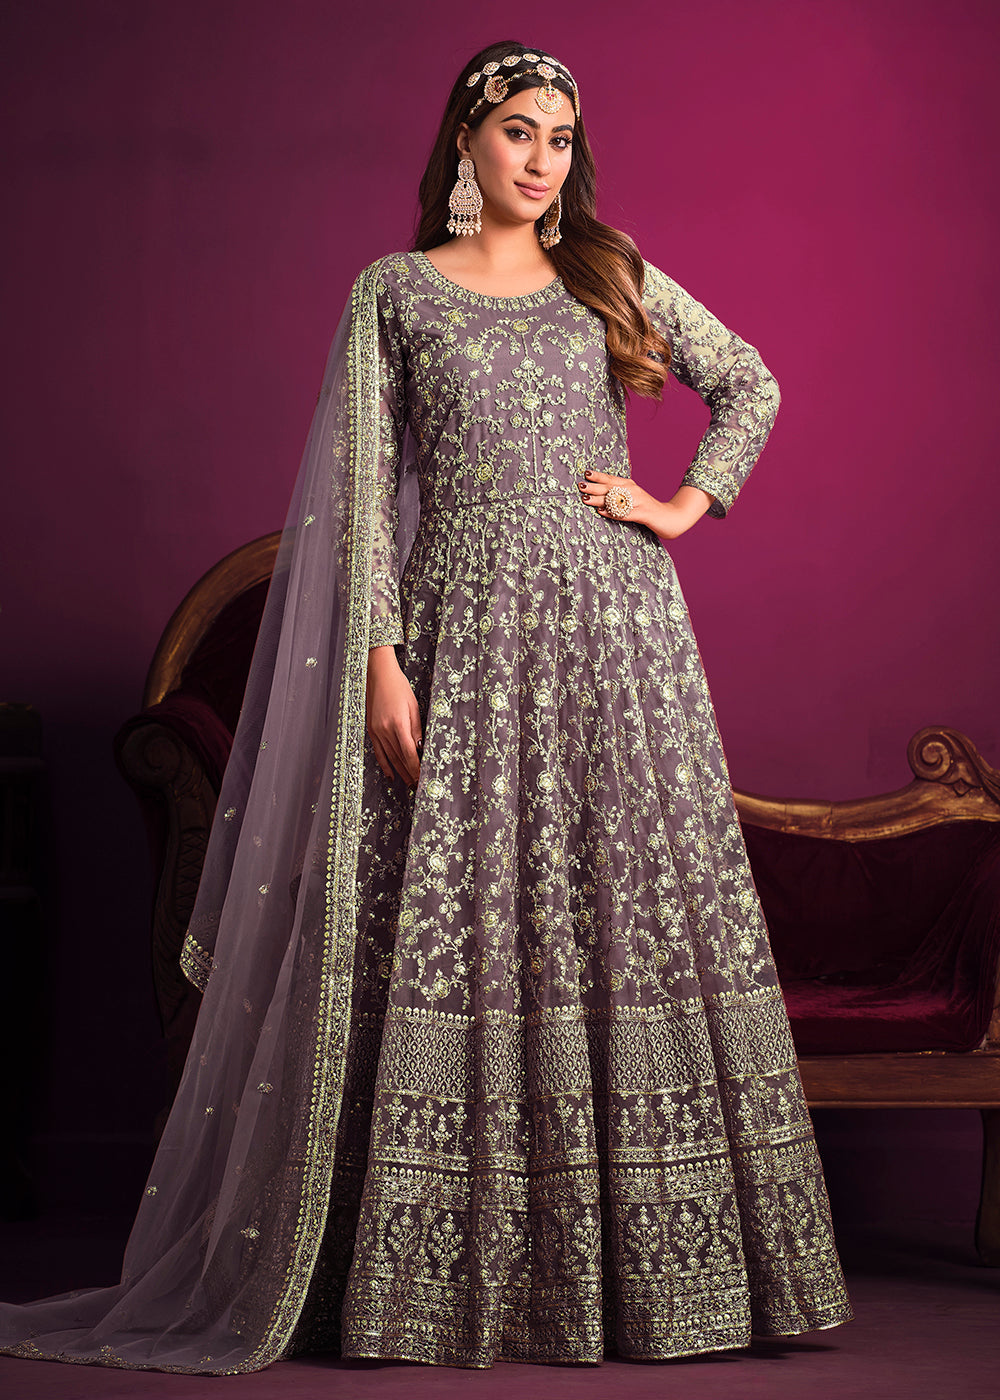 Buy Now Net Classy Lavender Floor Length Ceremonial Anarkali Suit Online in USA, UK, Australia, New Zealand, Canada, Italy & Worldwide at Empress Clothing. 